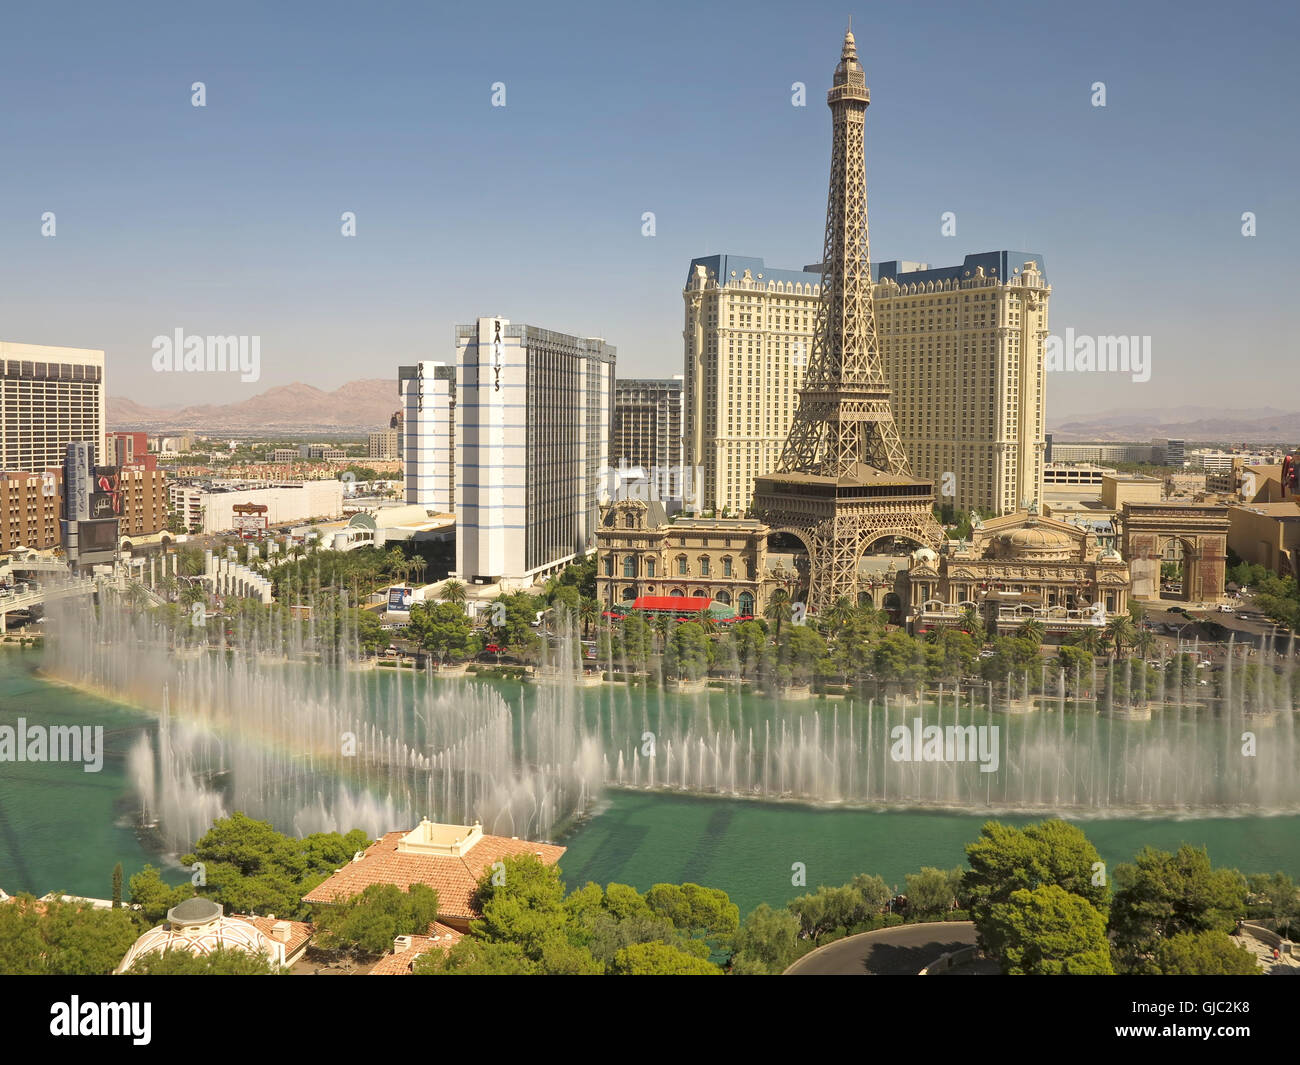 View of the Las Vegas Strips from the Bellagio, including the fountains and Paris Stock Photo